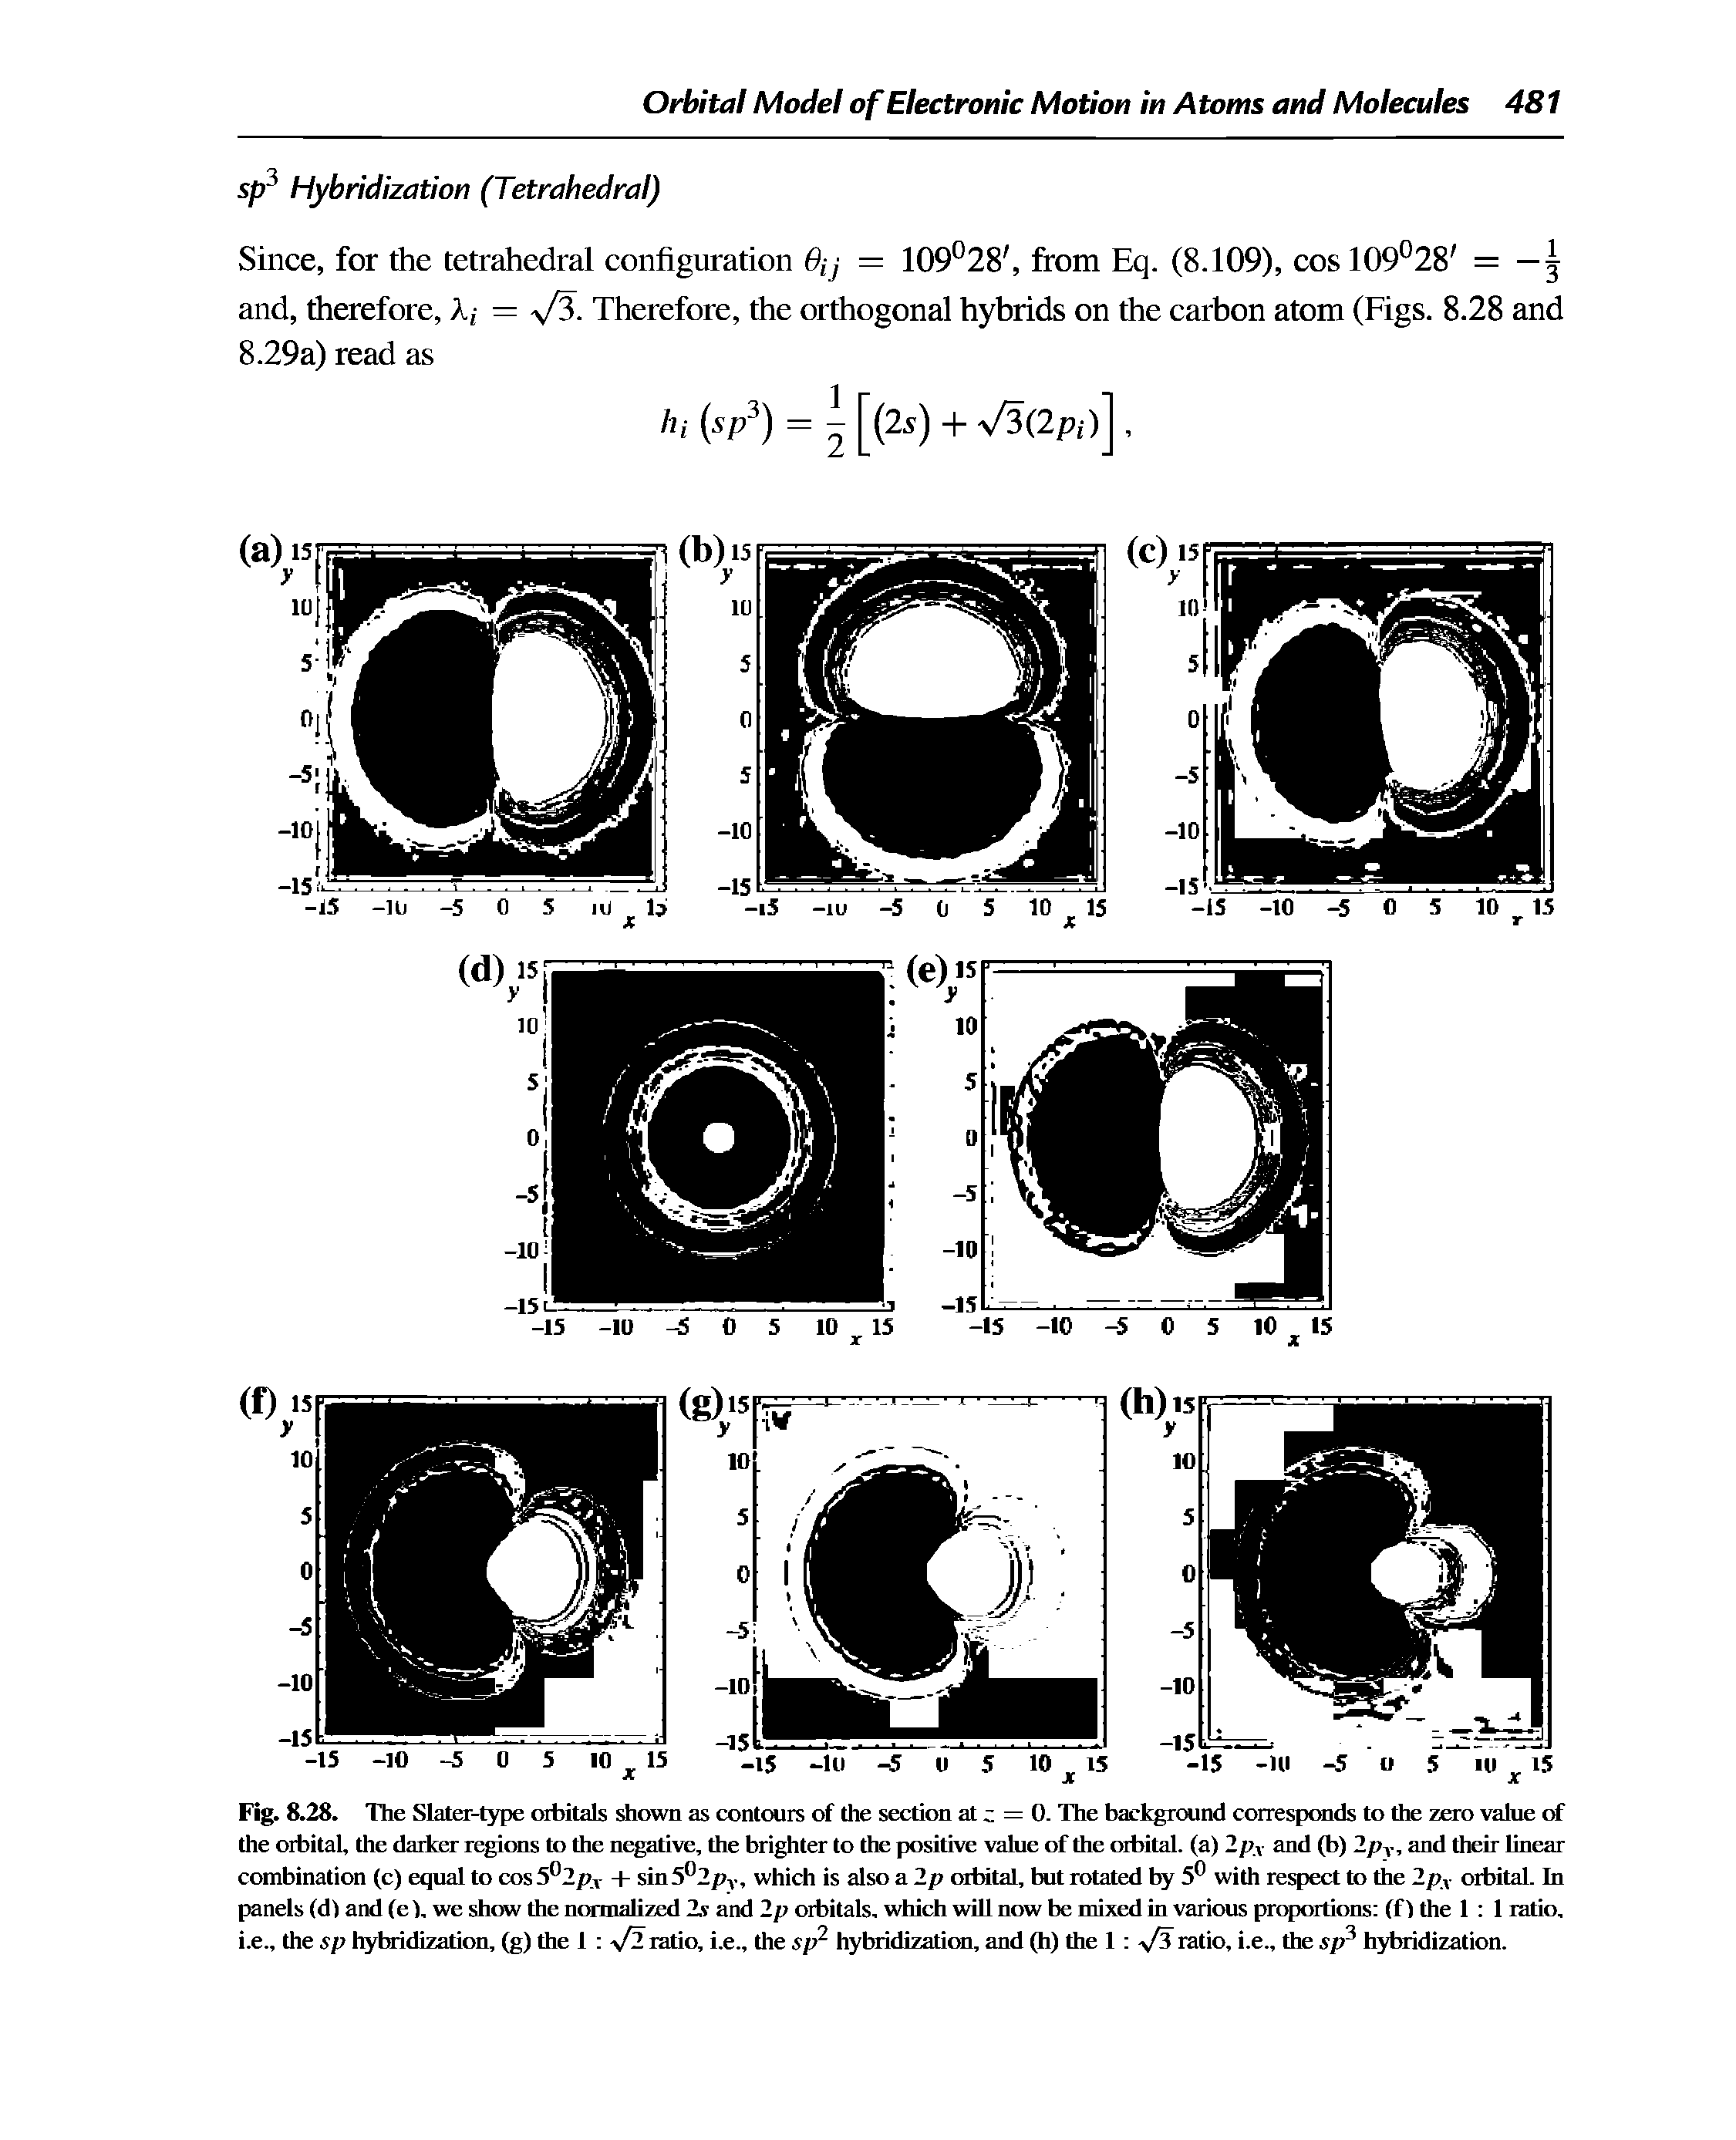 Fig. 8.28. Tlie Slater-type oibitals shown as contours of the section at = 0. Hie background coirespraids to the zero value of the orbital, the darker regions to the negative, the brighter to the positive value of the oibital. (a) 2px and (b) 2py, and their linear combination (c) equal to cos + sin5 2/iy. which is alsoa 2p oibital, but rotated 1 5 with respect to the 2pv orbital In panels fd) and (el we show the normalized Zv and 2p orbitals, which will now be mixed in various pn xations (f) the 1 1 ratio. i.e., the sp l tridization, (g) the 1 t/2 ratio, i.e., the sp hybridizatiim, and (h) the 1 y/3 ratio, i.e., the sf hybridization.